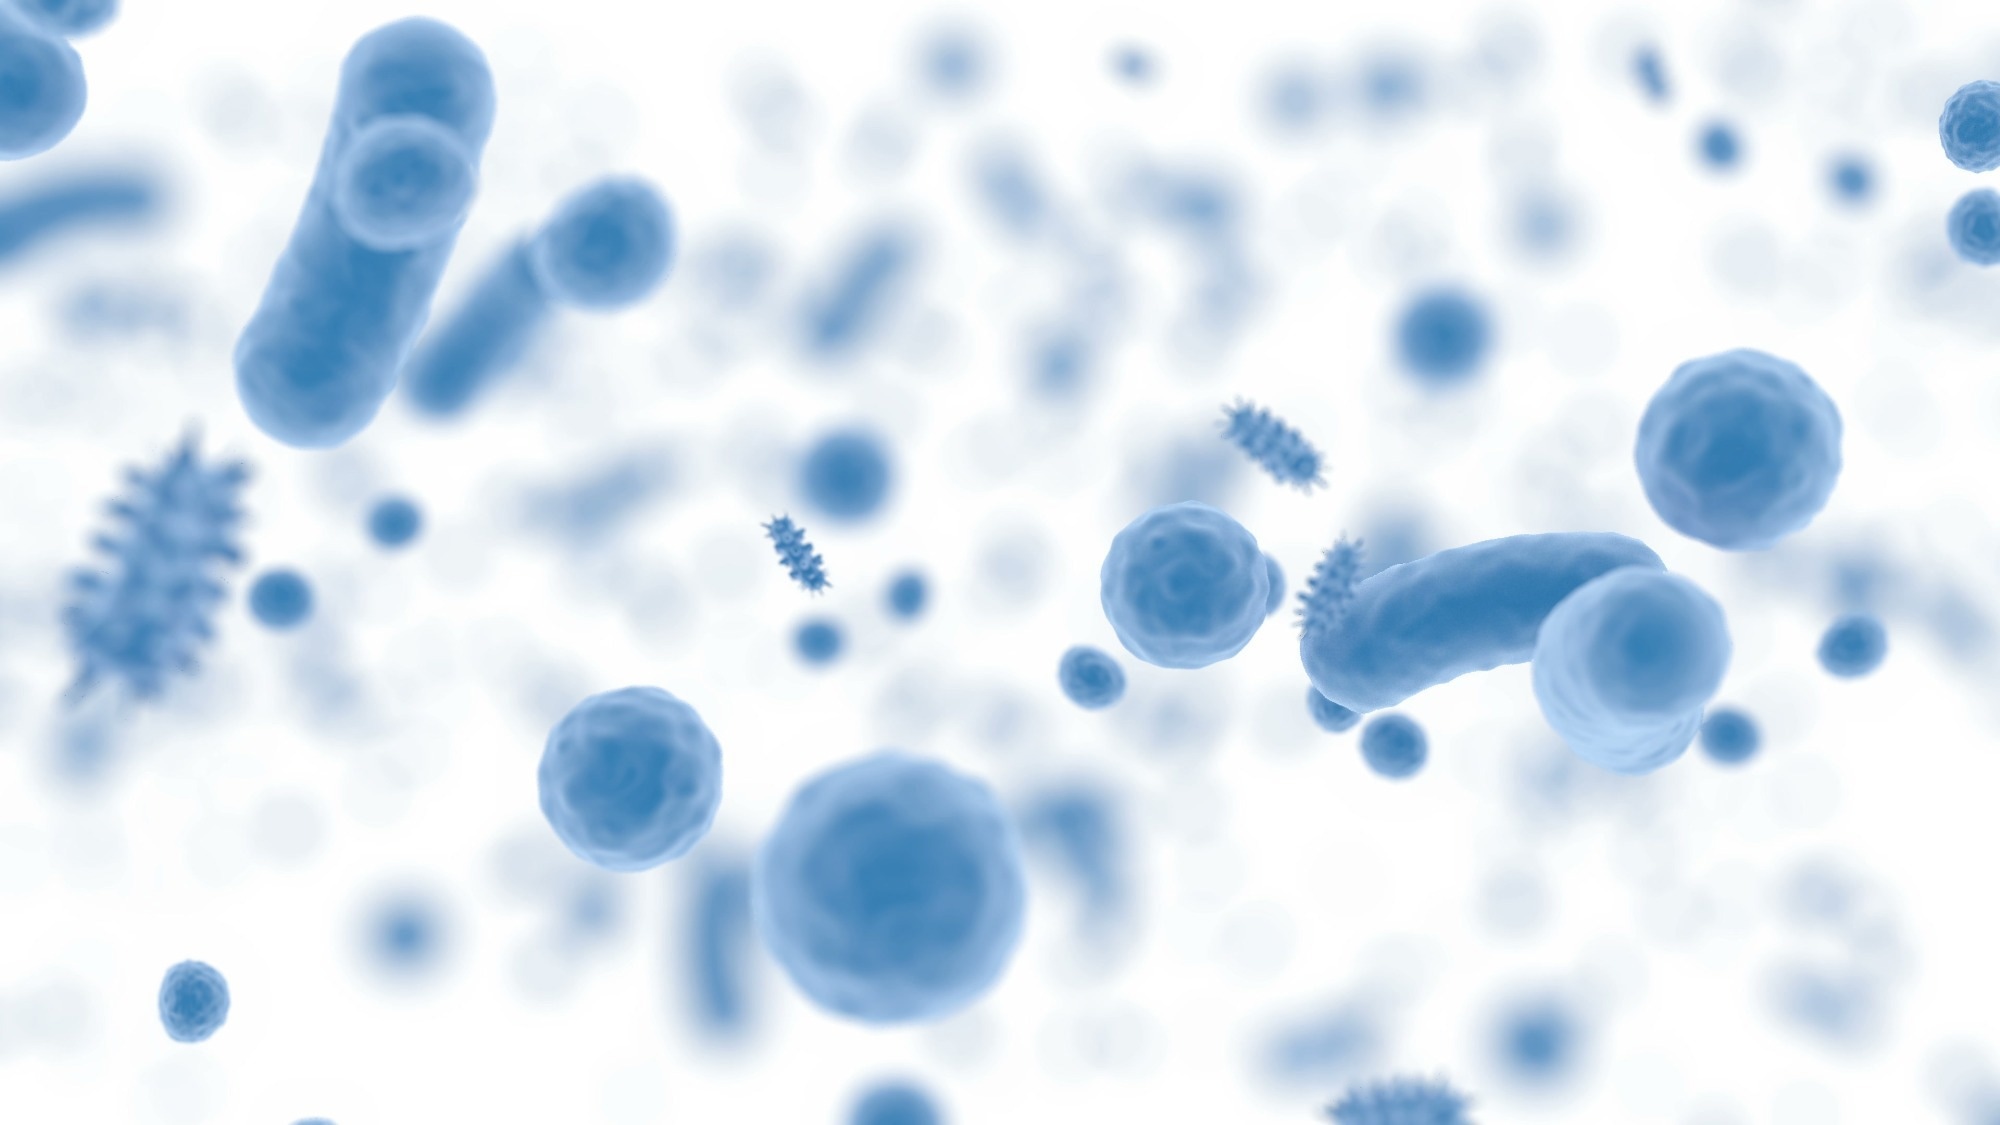 Study: Putting bacteria on the cancer map. Image Credit: Volodimir Zozulinskyi / Shutterstock